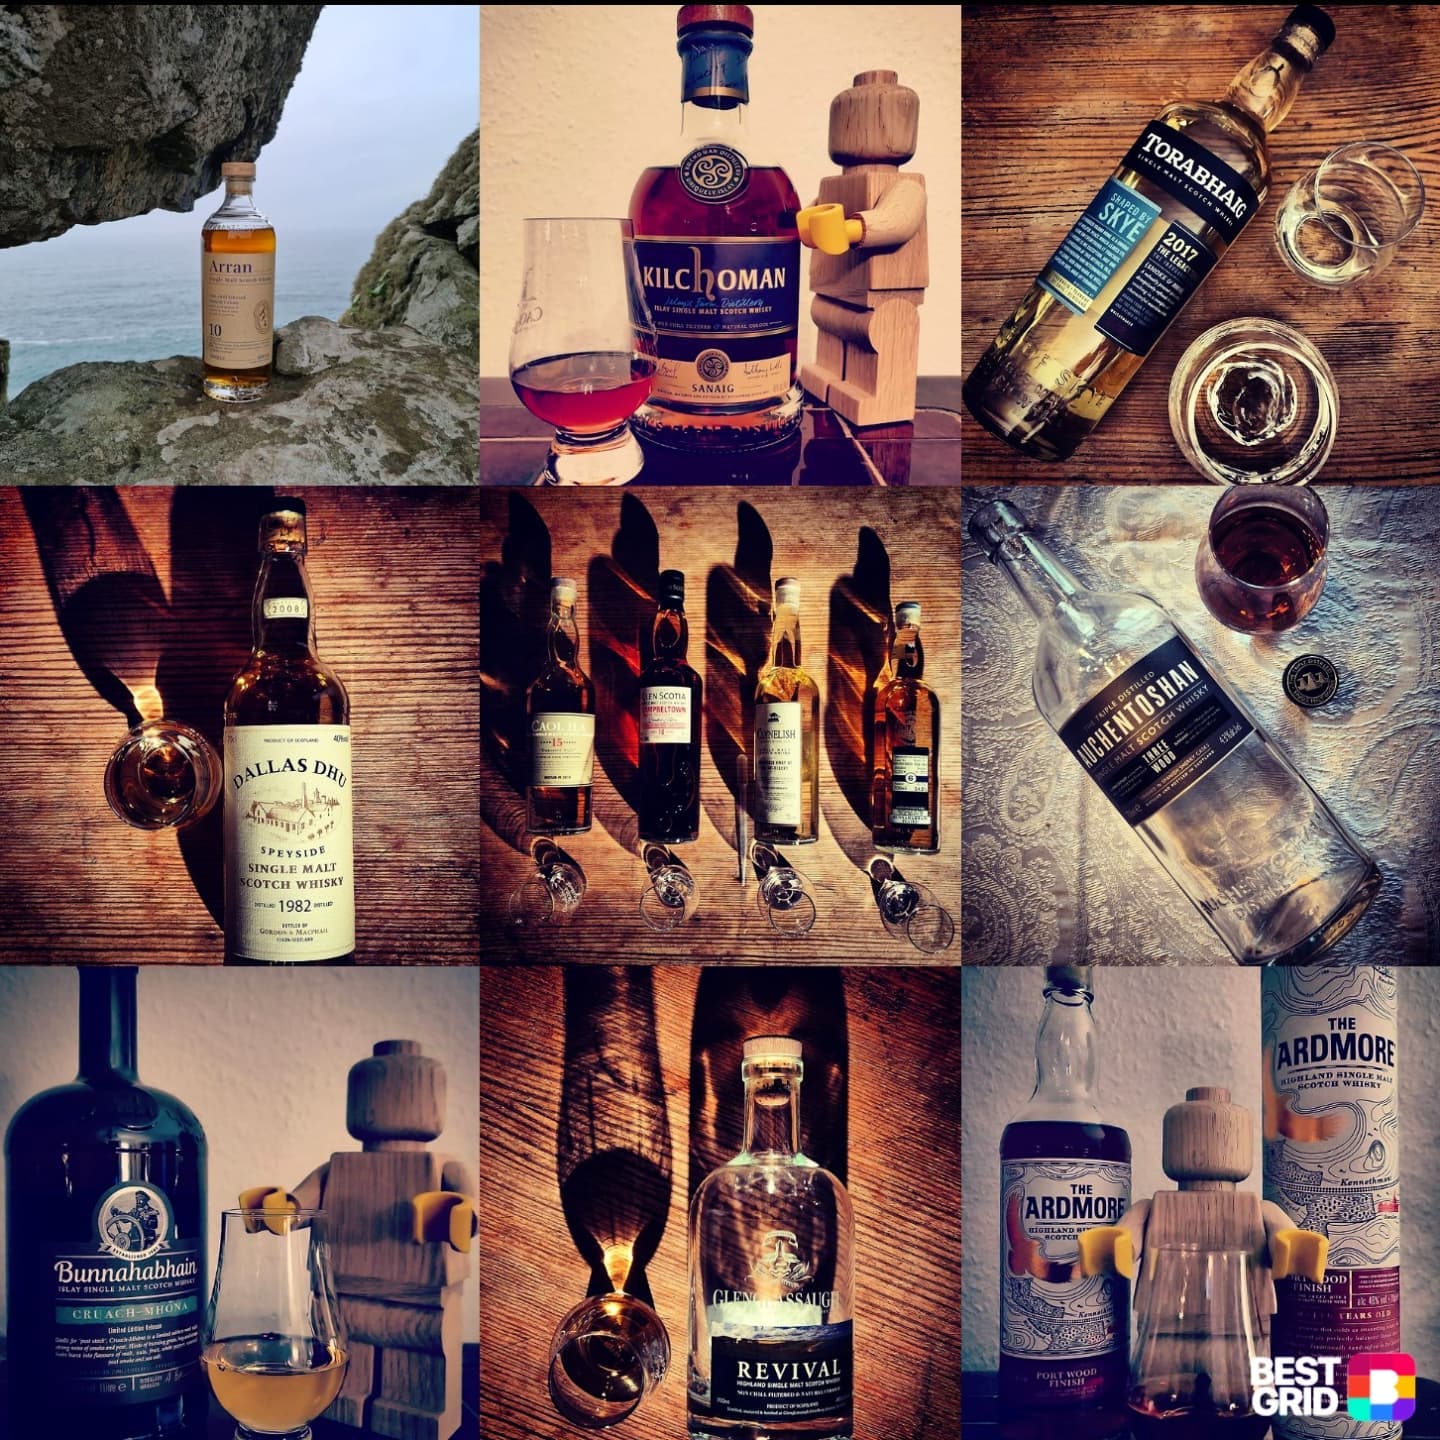 Thanks to everyone for you support in 2021 - have a great night, a superb 2022 and see you soon for the next post... Can't wait to finally celebrate 1k followers with you!

Cheers and enjoy your dramming! 🥃🎊

#greattimes #topnine #thx #thankyou #thankful #thanksforyoursupport #newyear #happynewyear #celebrate #celebrations #celebrategoodtimes #giveaway #1kfollowers #1k #summary #whisky #whiskyexperience #whiskymania #whiskyland #whiskey #picoftheday #grid #bestof #bestof2021 #hofsaale #oberfranken #whiskyporn #whiskylovers #whiskytasting #mcwulf